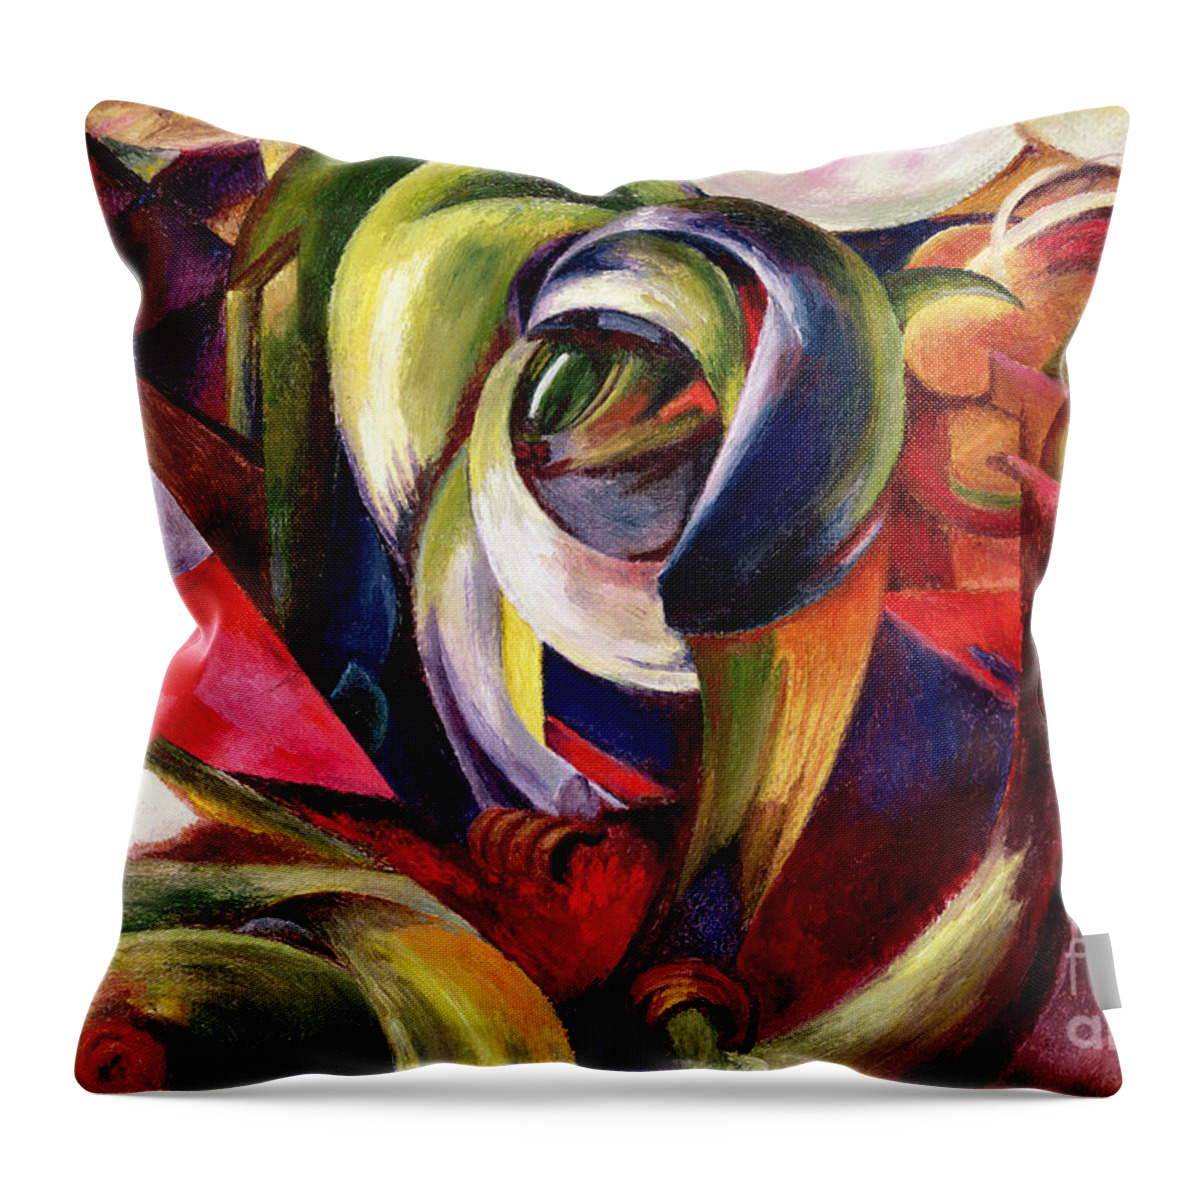 Mandrill Throw Pillow featuring the painting Mandrill by Franz Marc